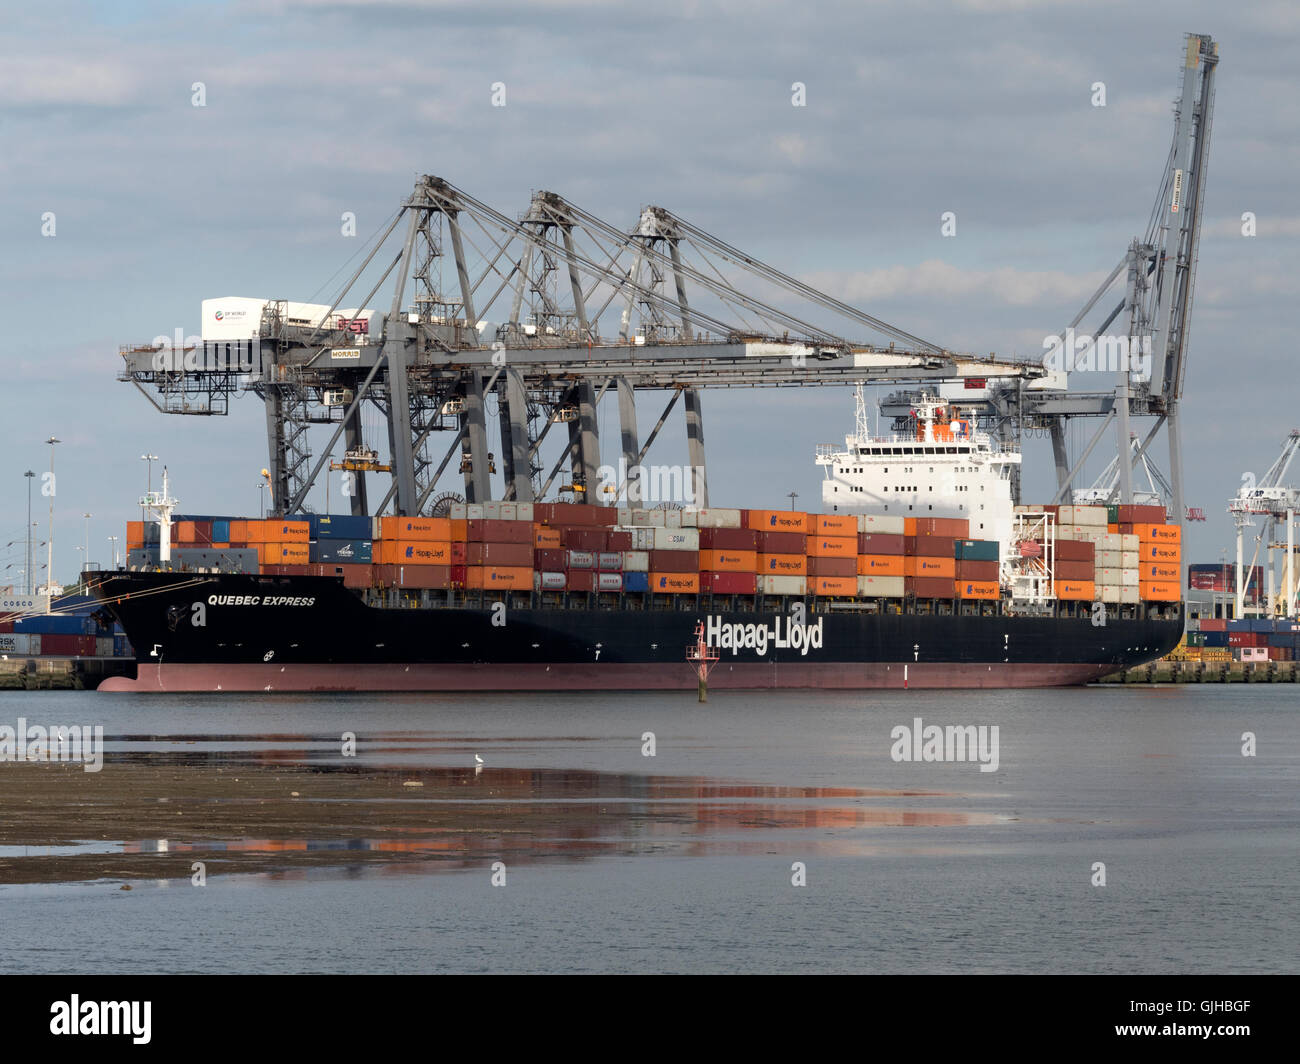 Hapag-Lloyd "Quebec Express" Container-Schiff angedockt an Southampton Container-Hafen, Southampton, Hampshire, England, UK. Stockfoto